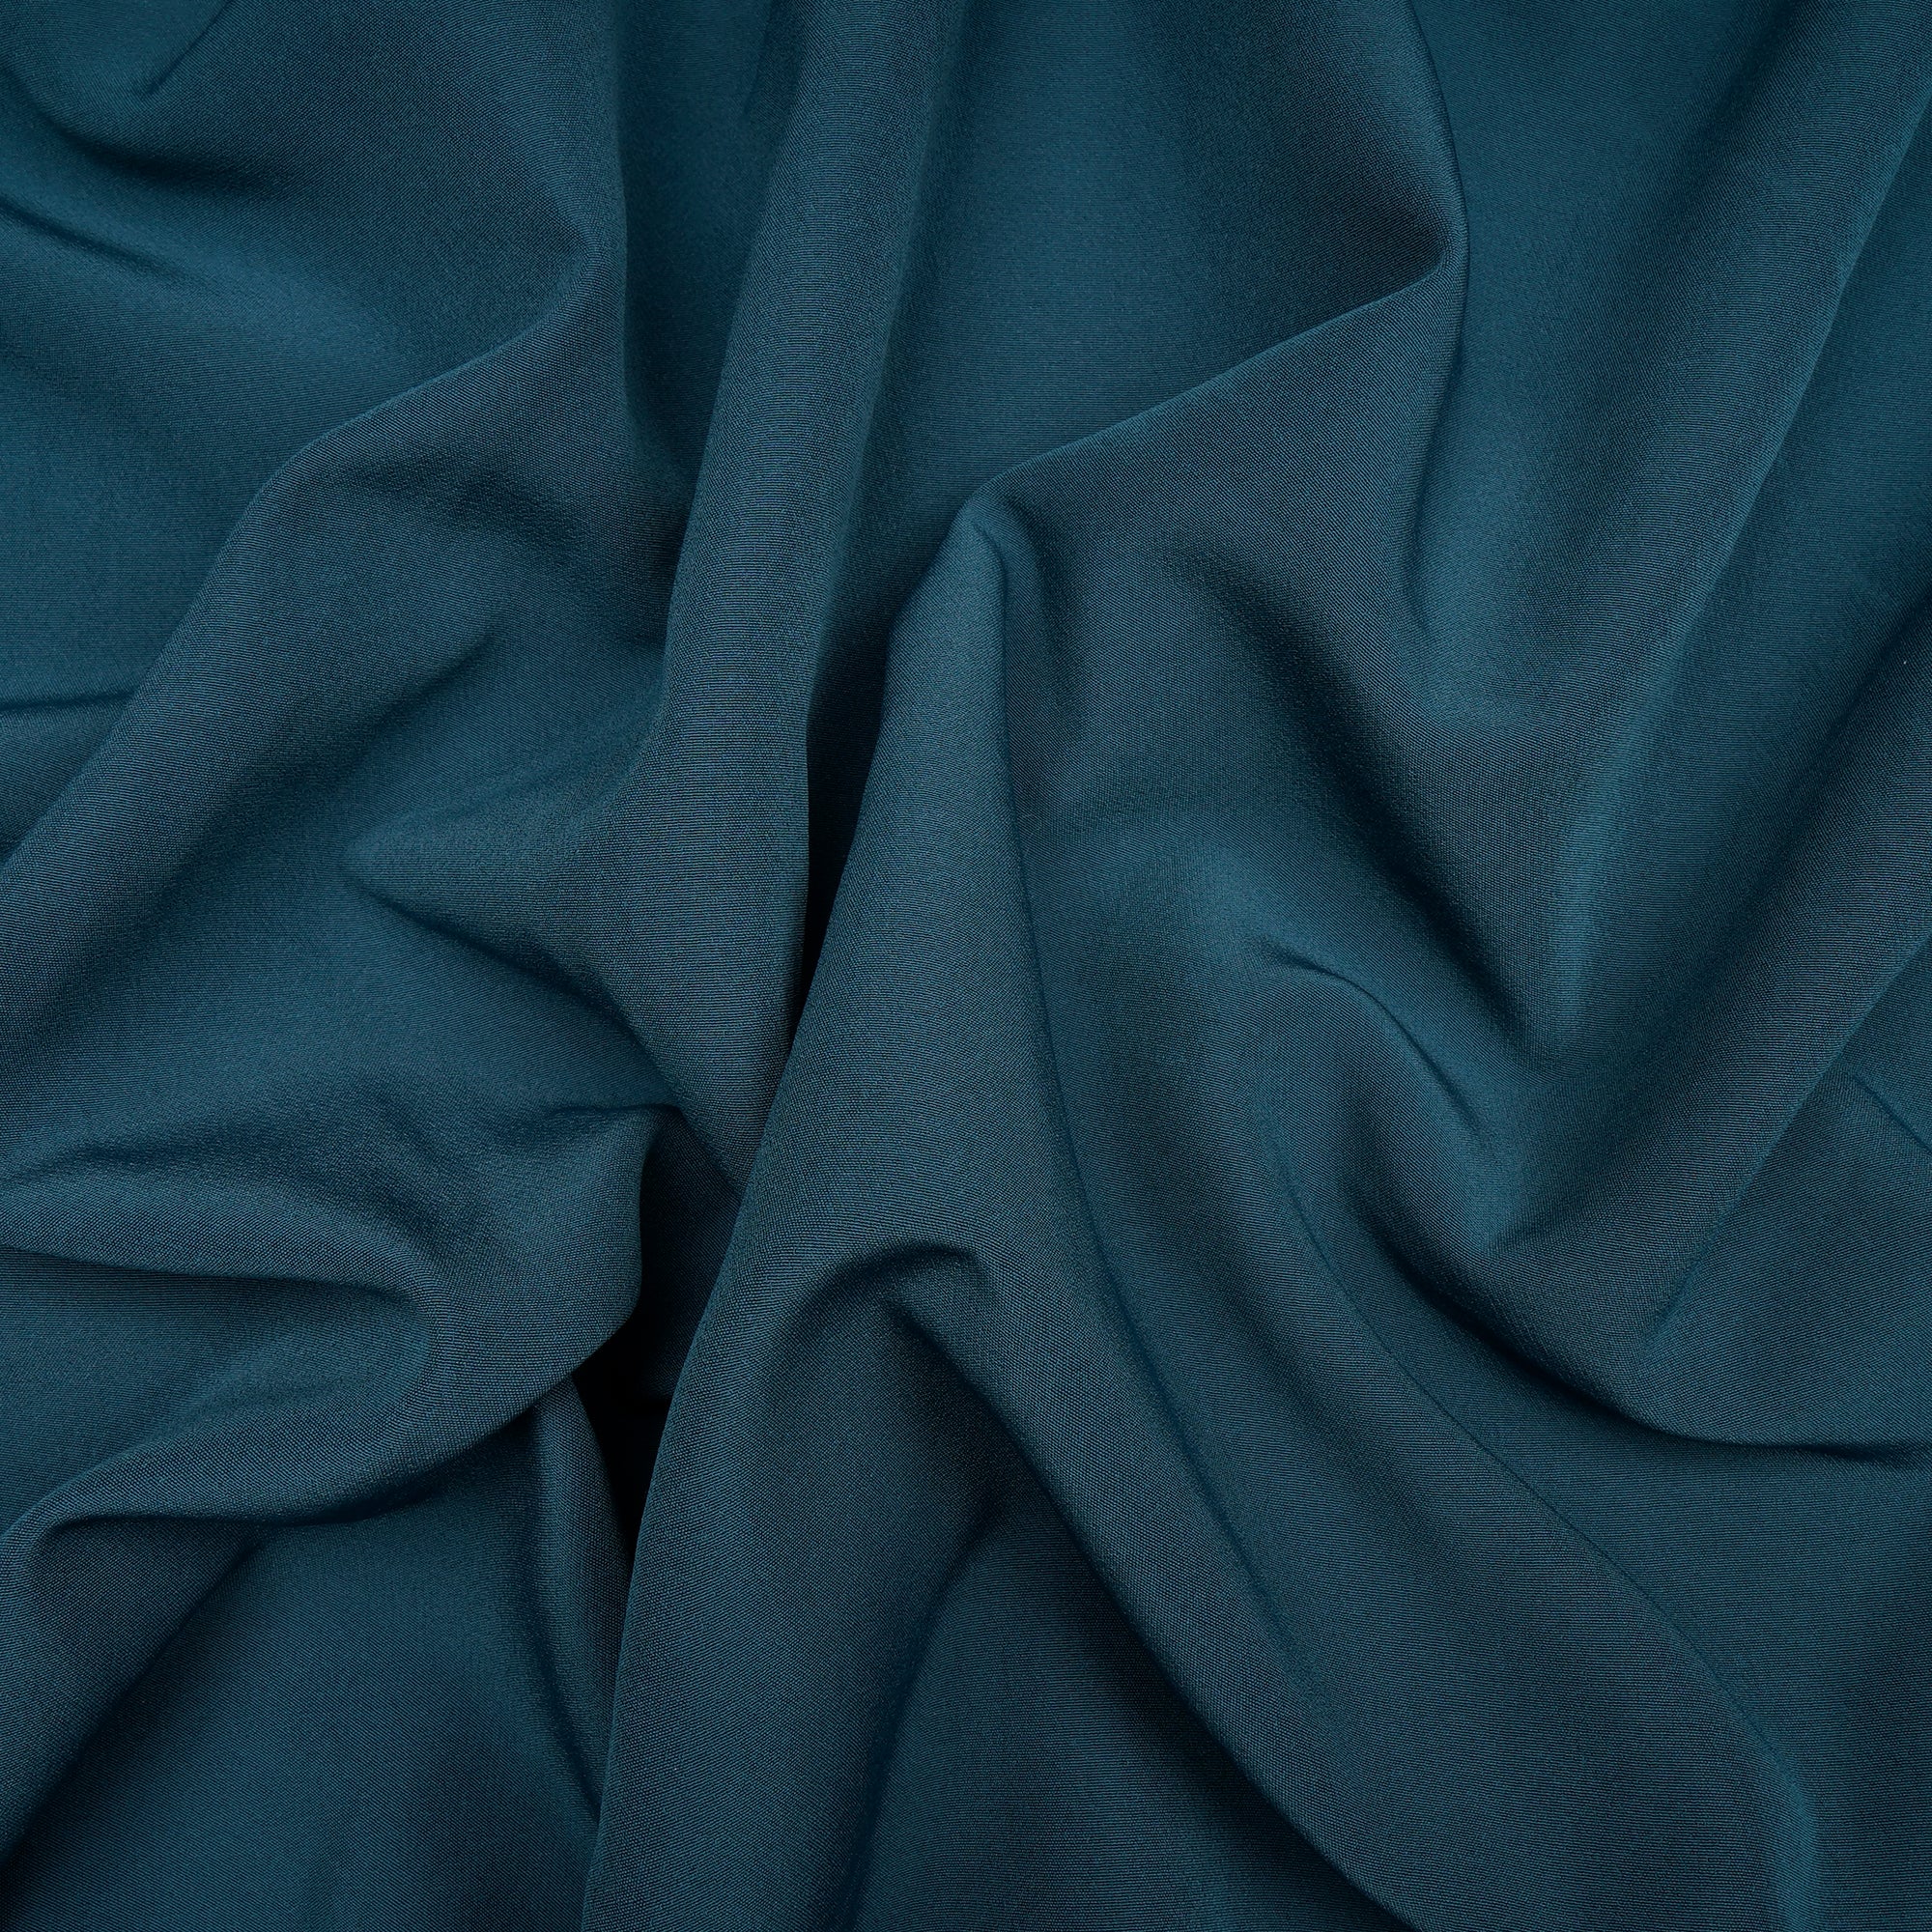 Balsam Solid Dyed Imported Banana Crepe Fabric (60" Width)